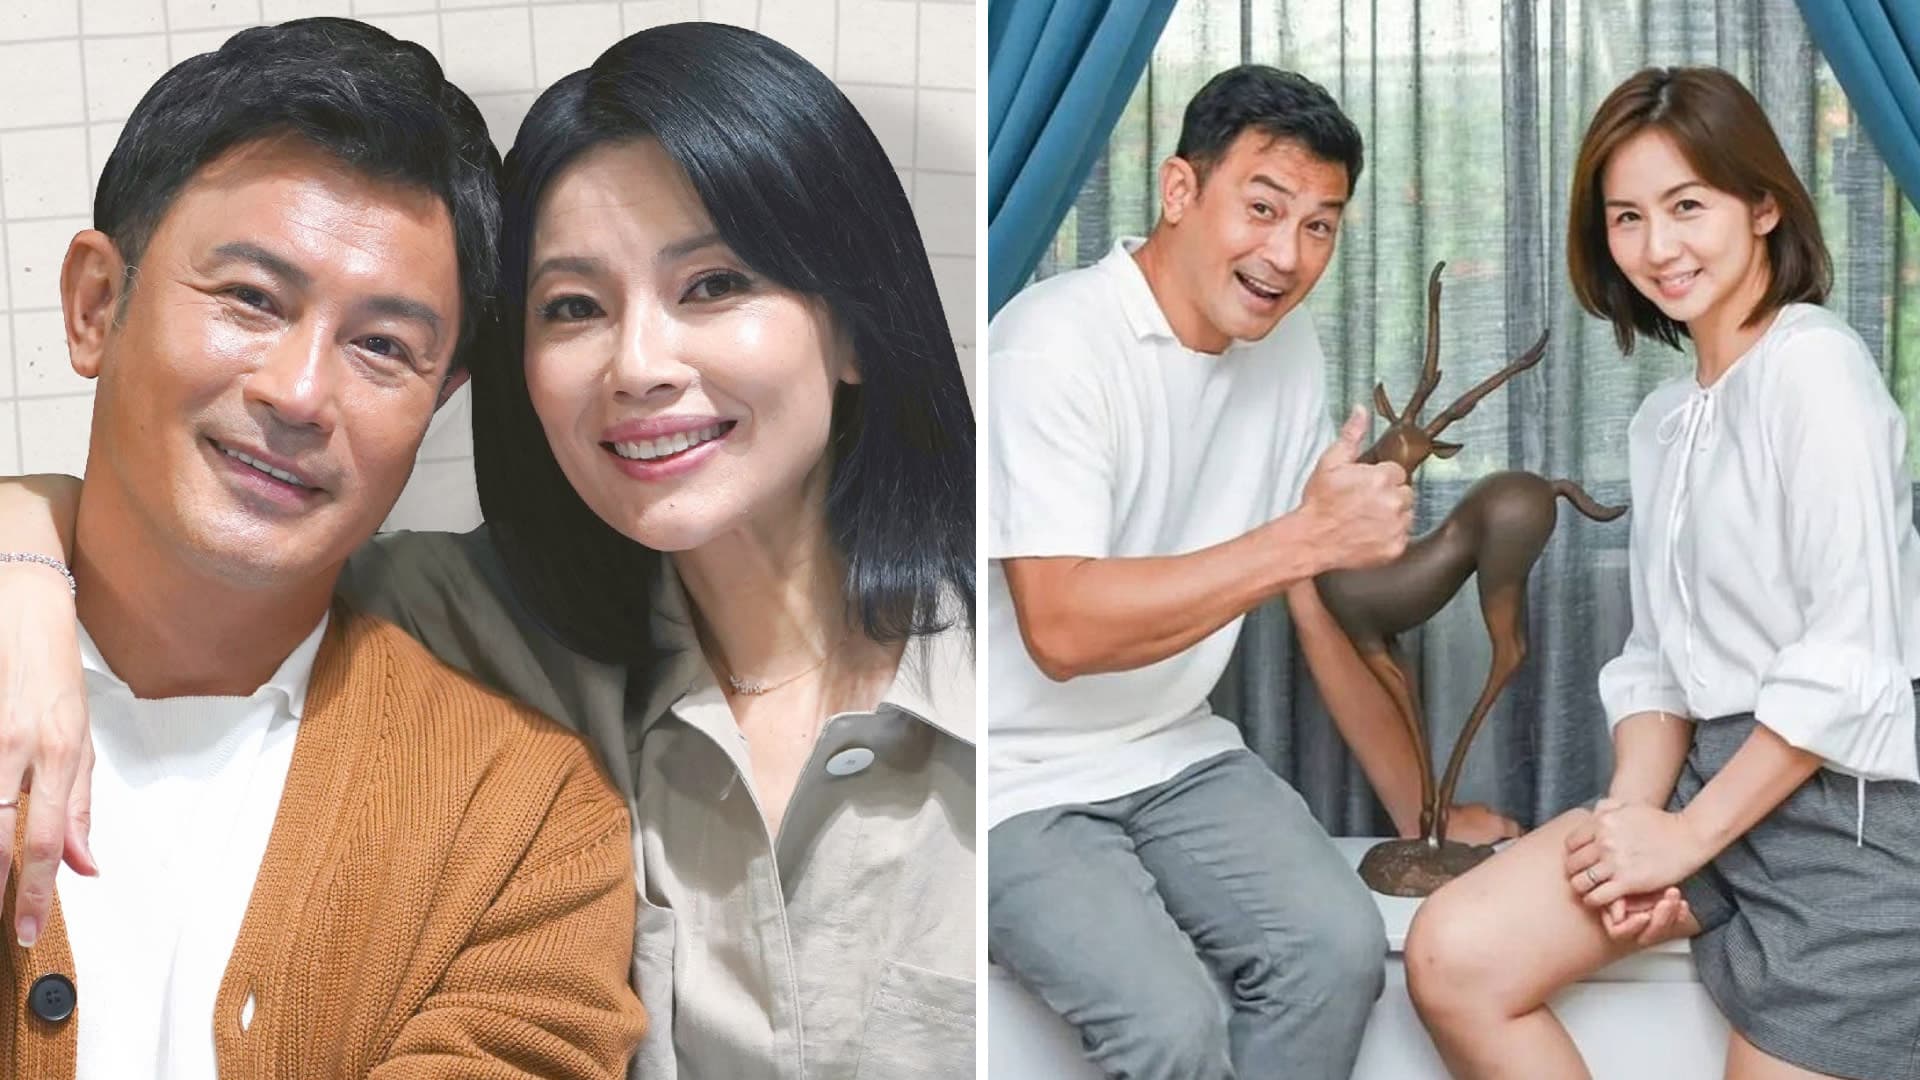 Darren Lim Used Sharon Au As A “Smokescreen” To Go On Dates With Wife Evelyn Tan When He Was Chasing Her